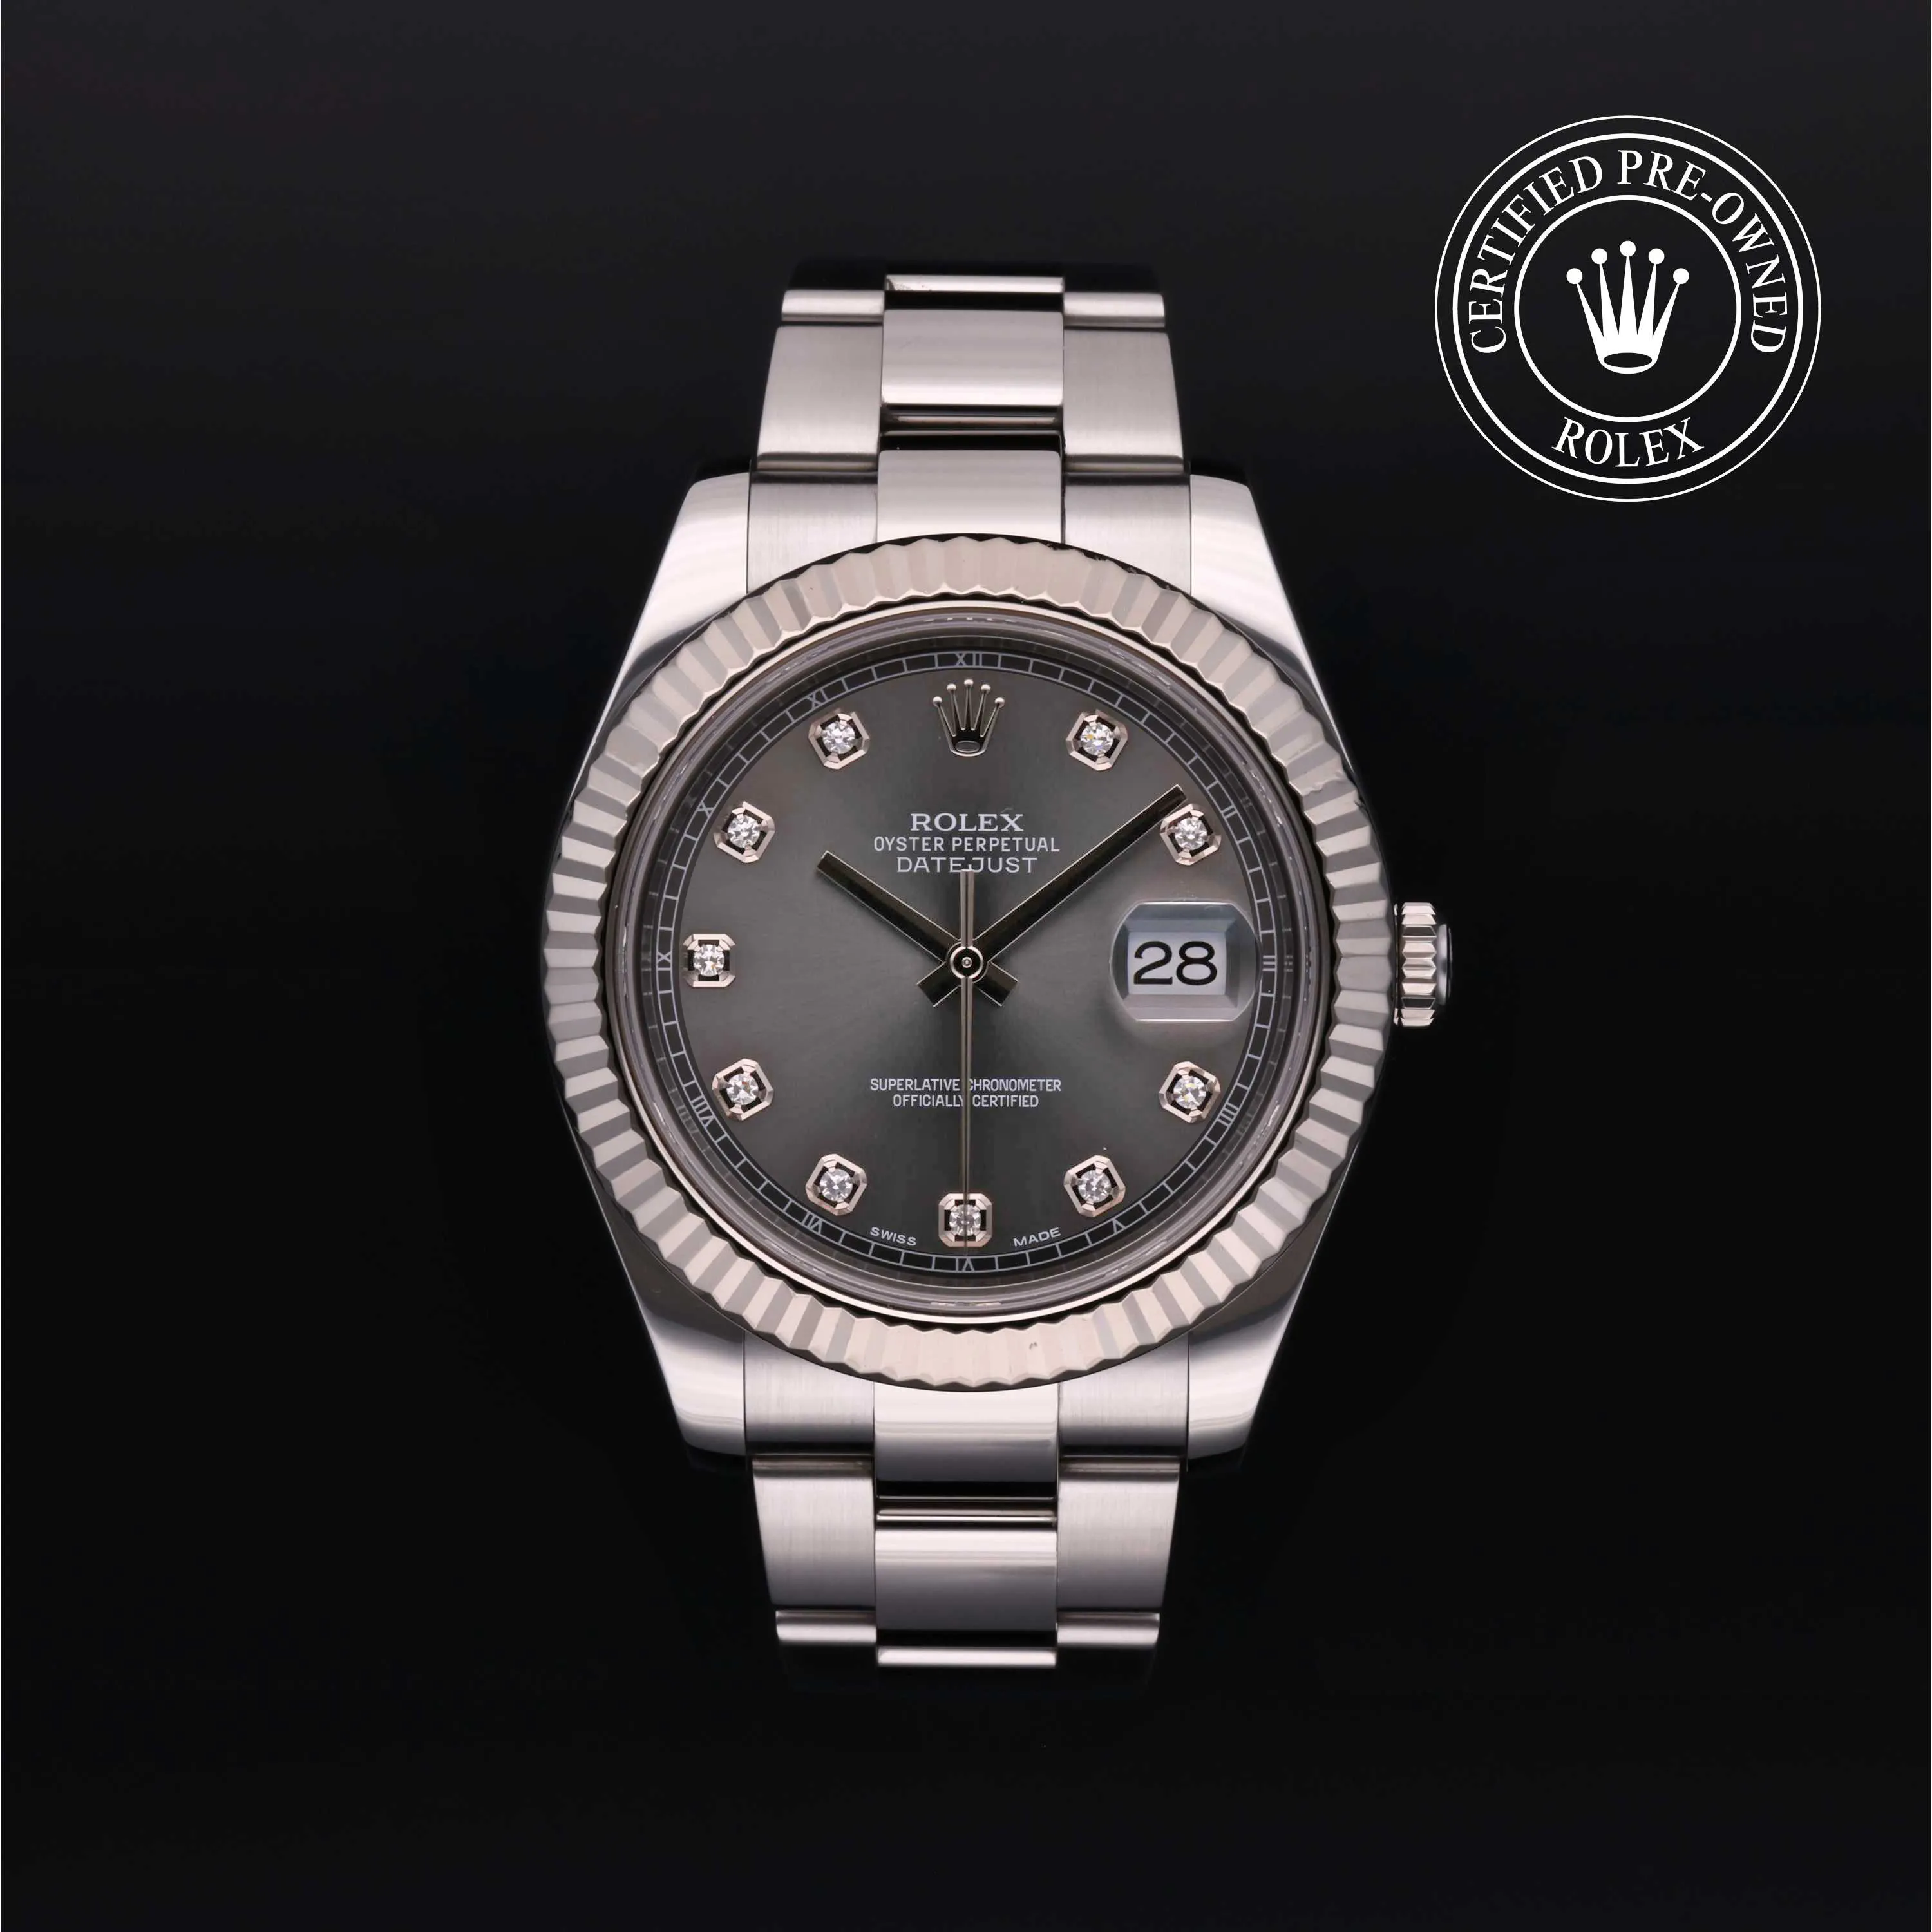 Rolex Datejust II 116334 41mm Stainless steel Gray